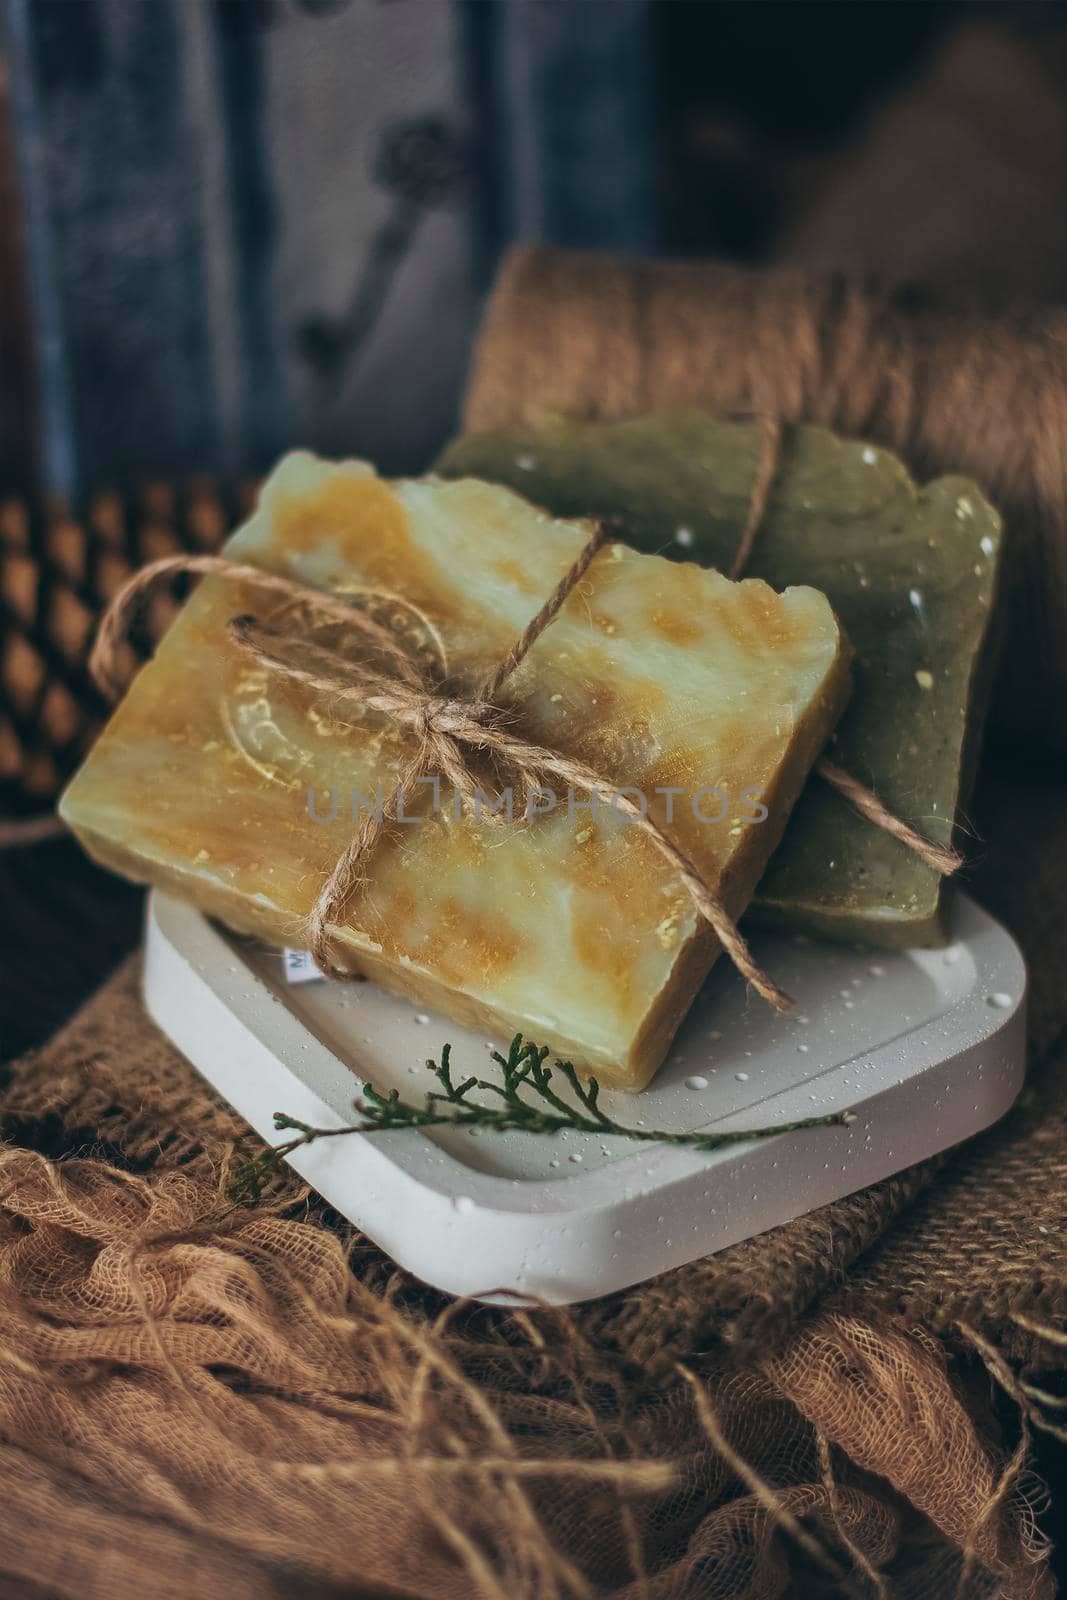 Pieces of beautiful natural handcrafted soap on wooden background with botanical elements, close up view. For relax, health, spa and aromatherapy